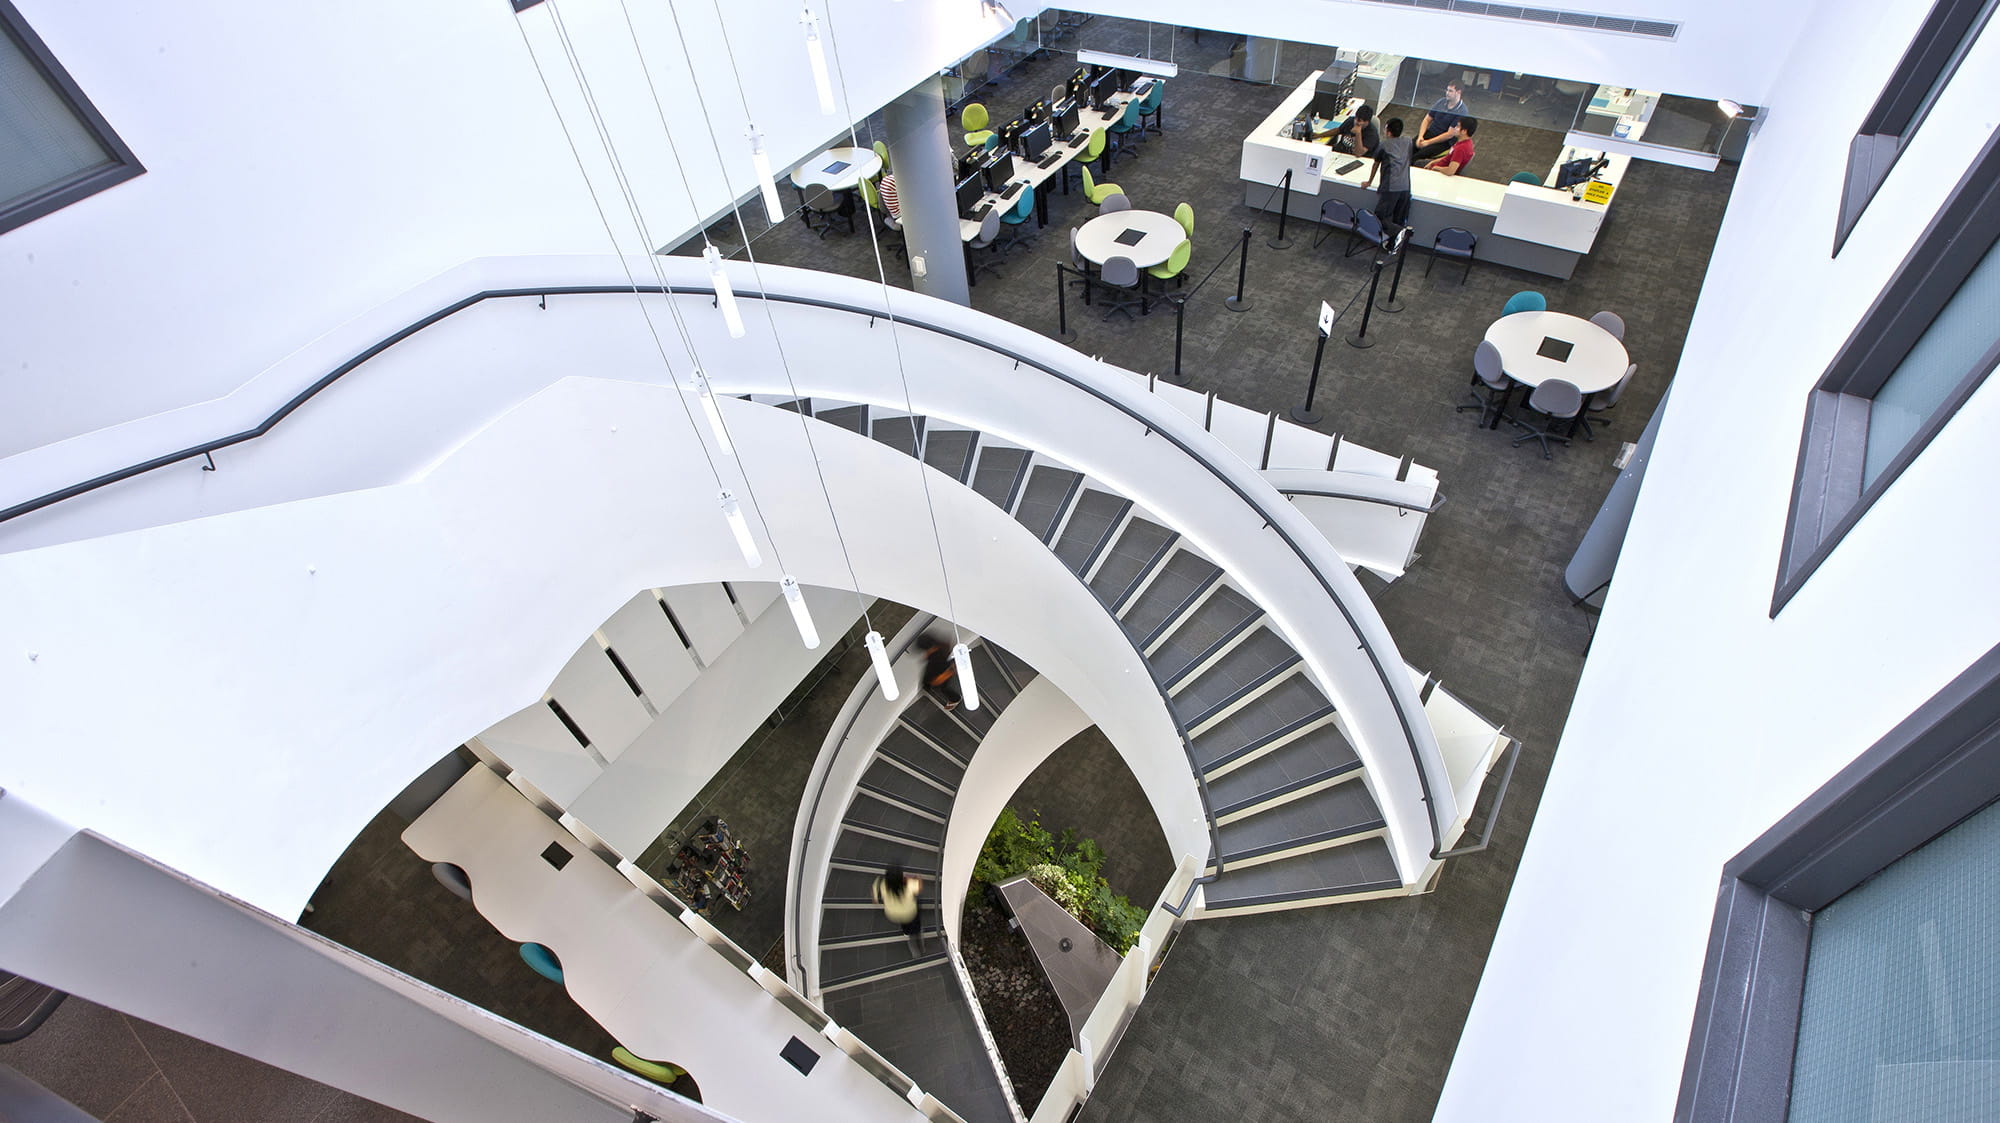 The bright white spiral stairs at the library as seen from the top